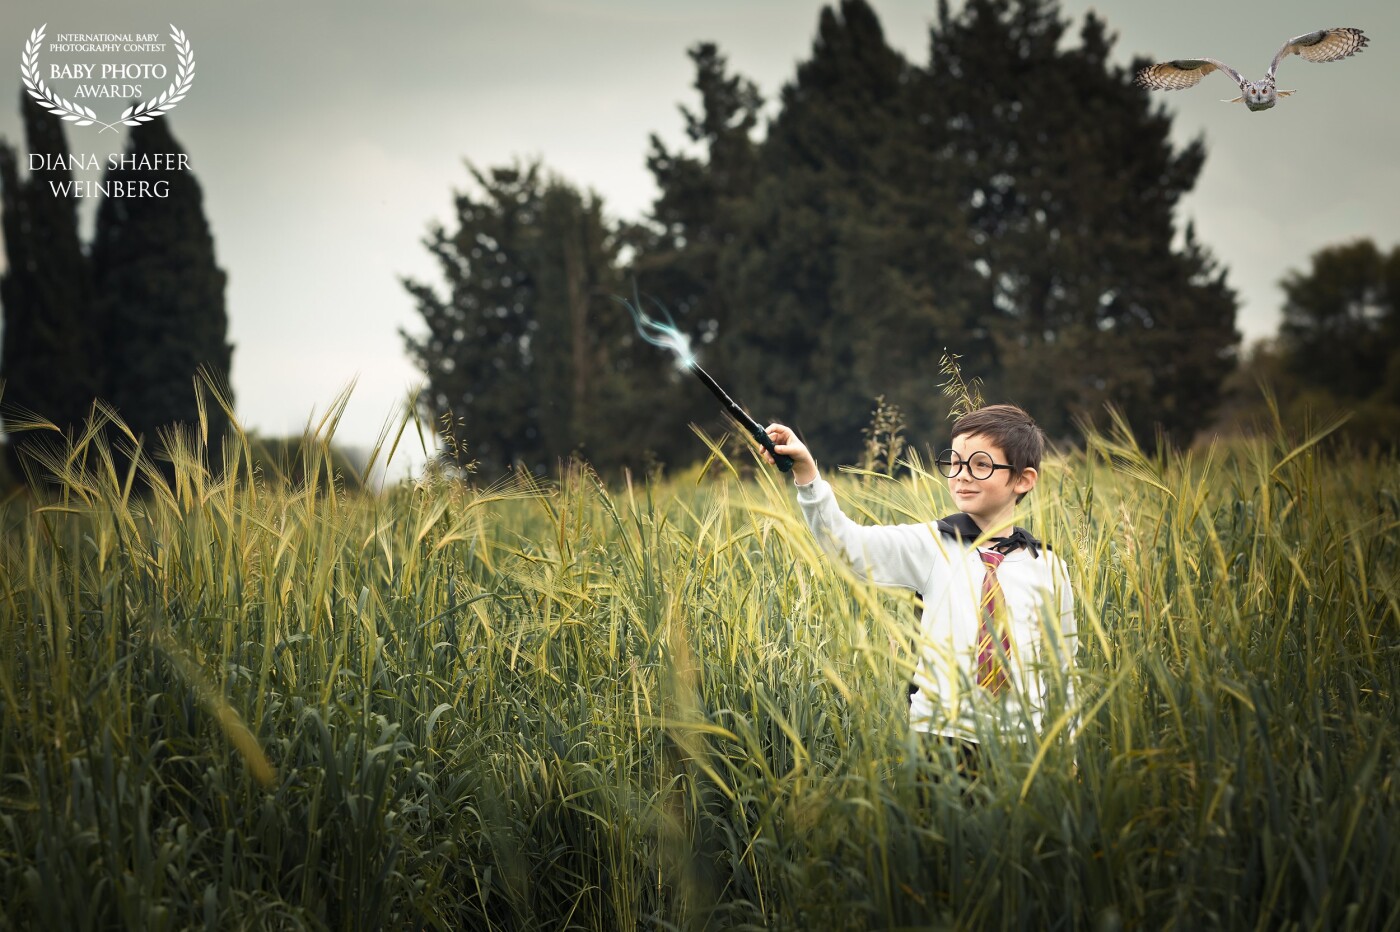 In the world of photography, we are able to connect magic and stories, children and their dreams. In this photo, Harry Potter inspired photoshoot.